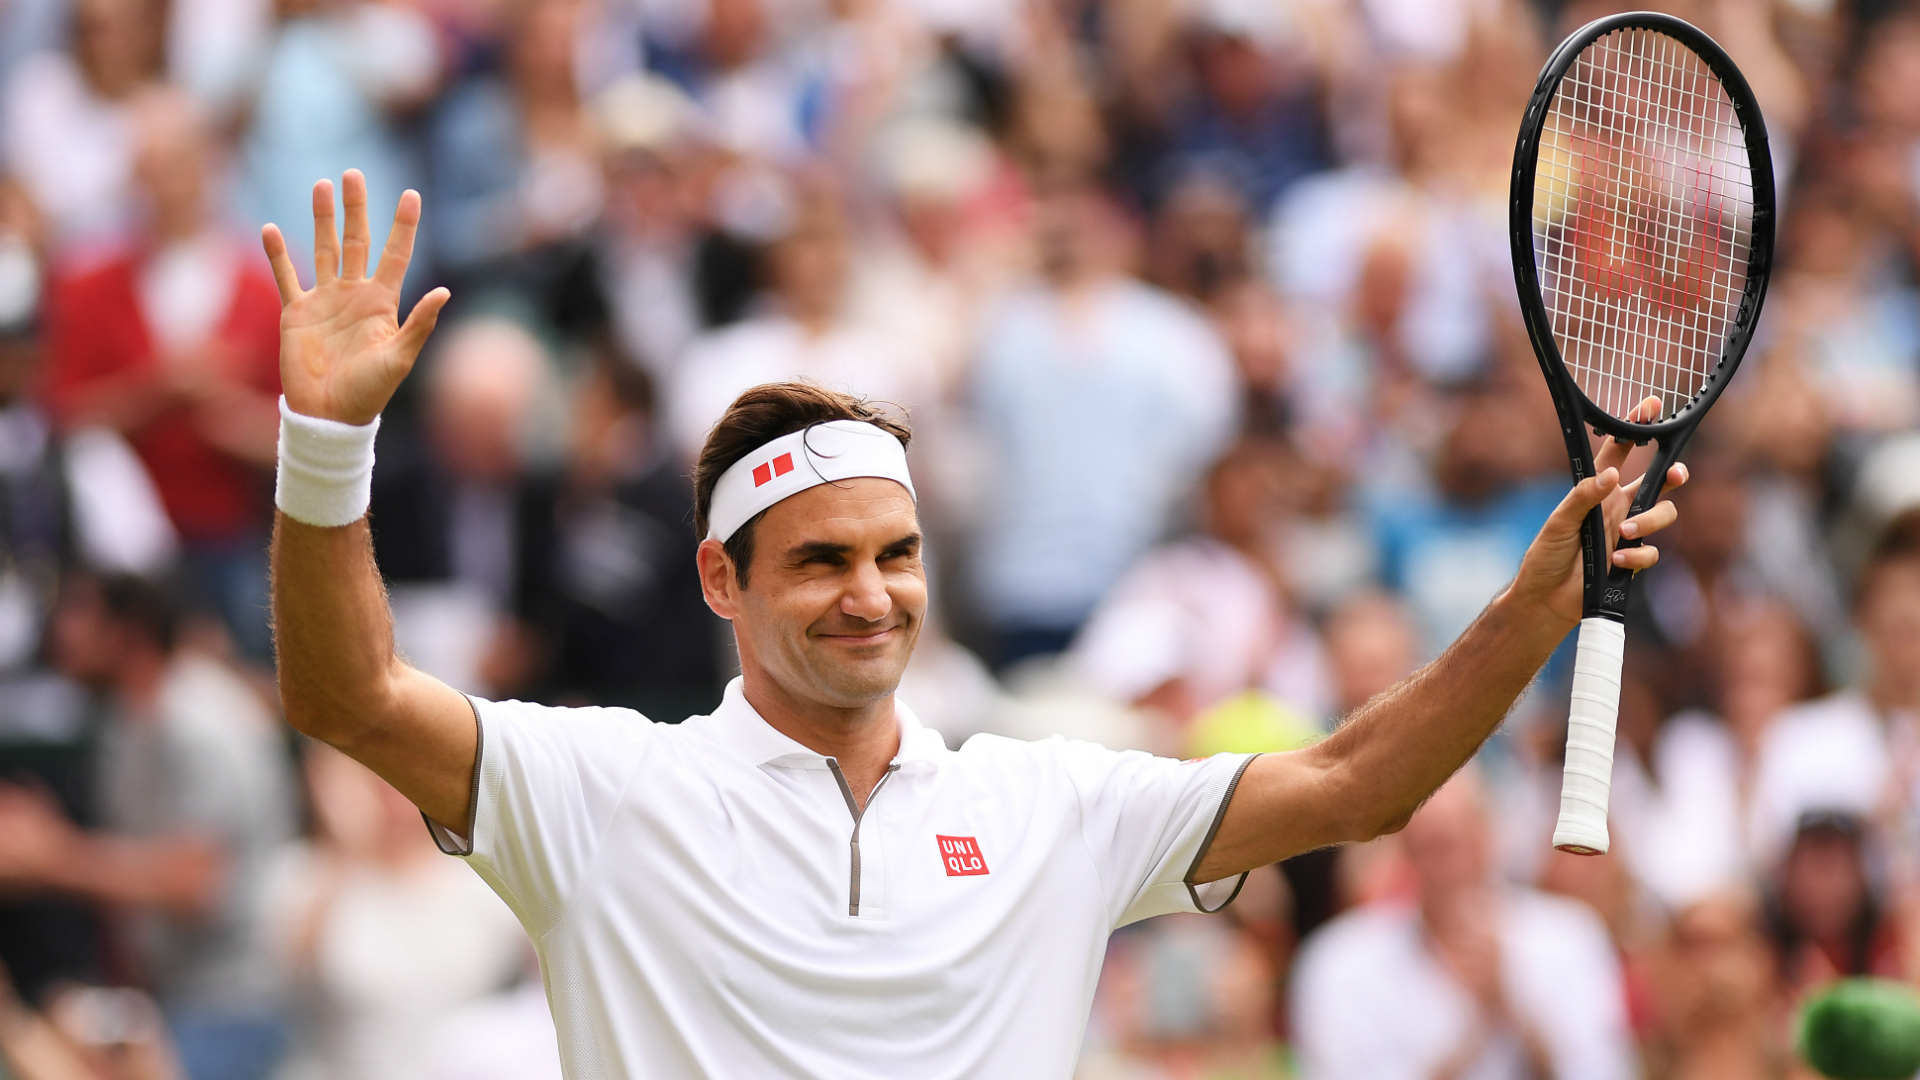 Wimbledon 2019: Roger Federer eases into second week | Sporting News1920 x 1080